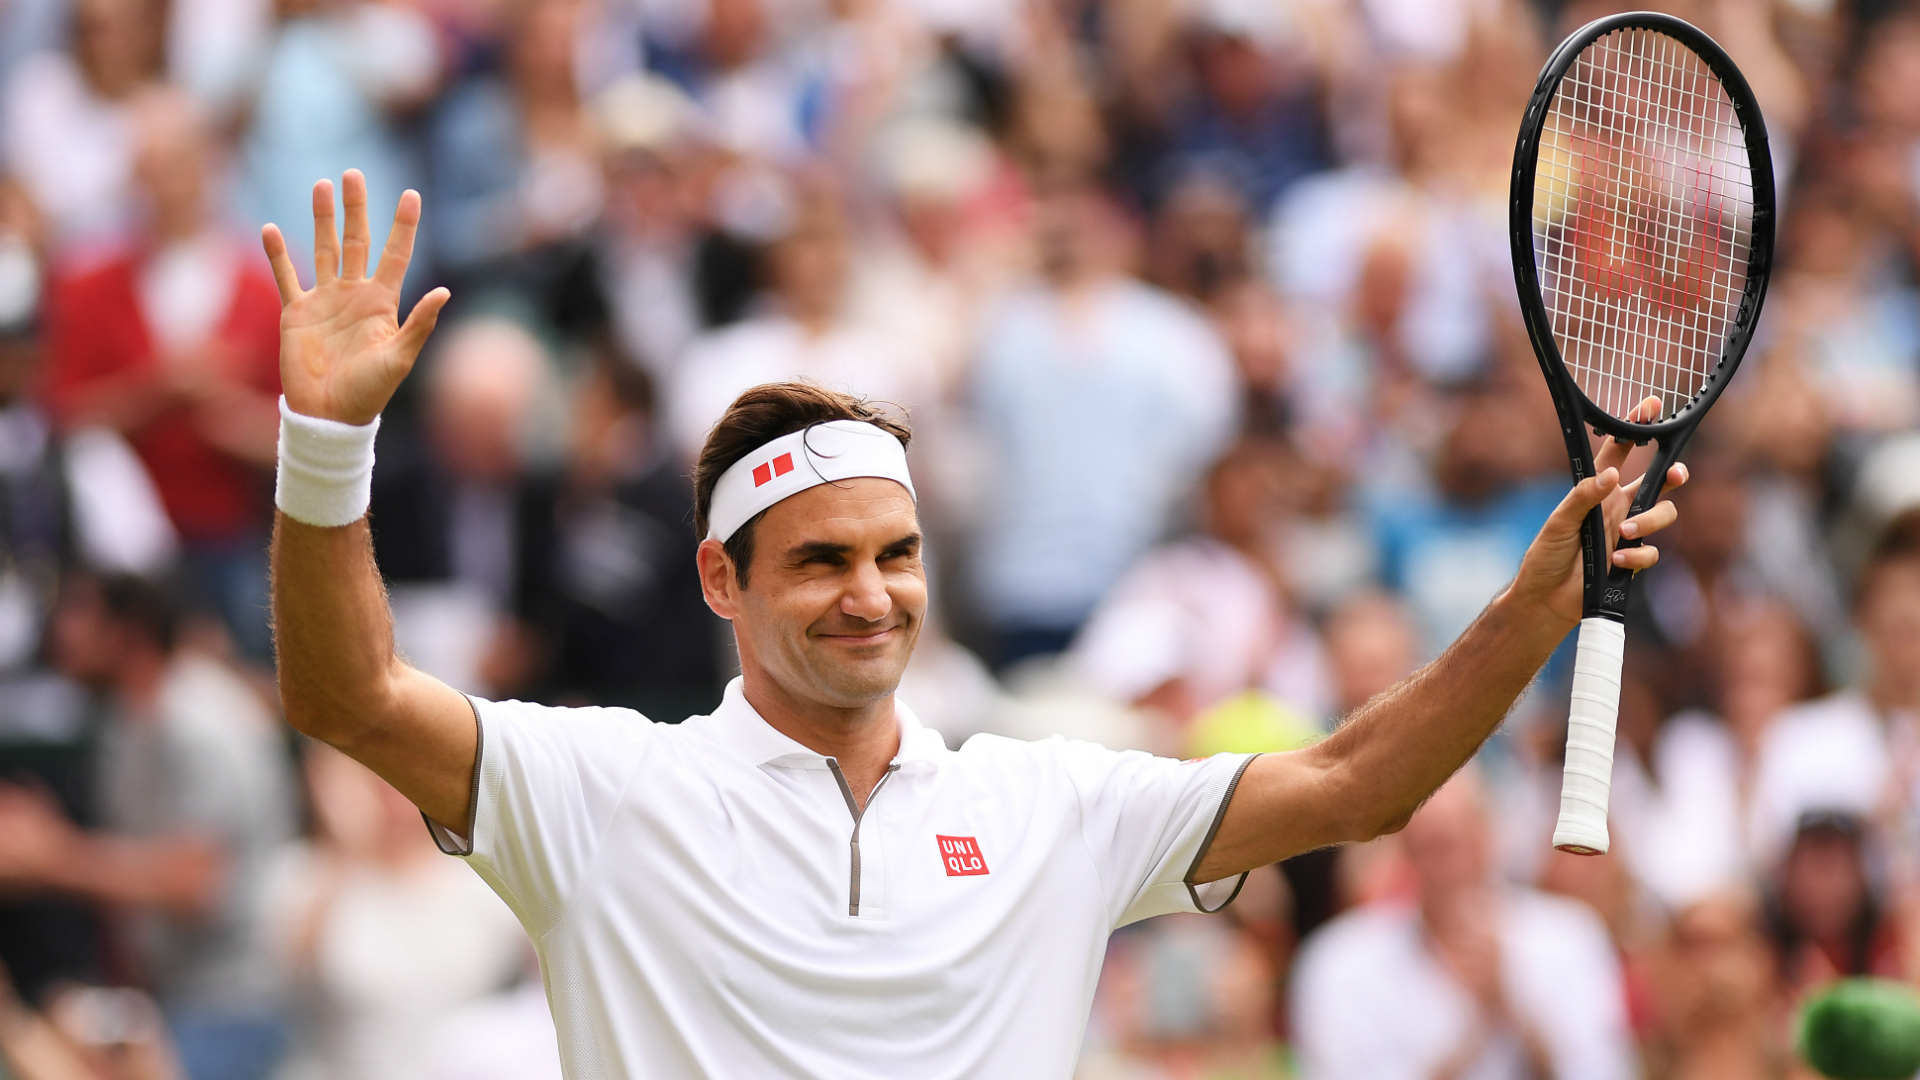 Wimbledon 2019: Roger Federer eases into second week | Sporting News1920 x 1080